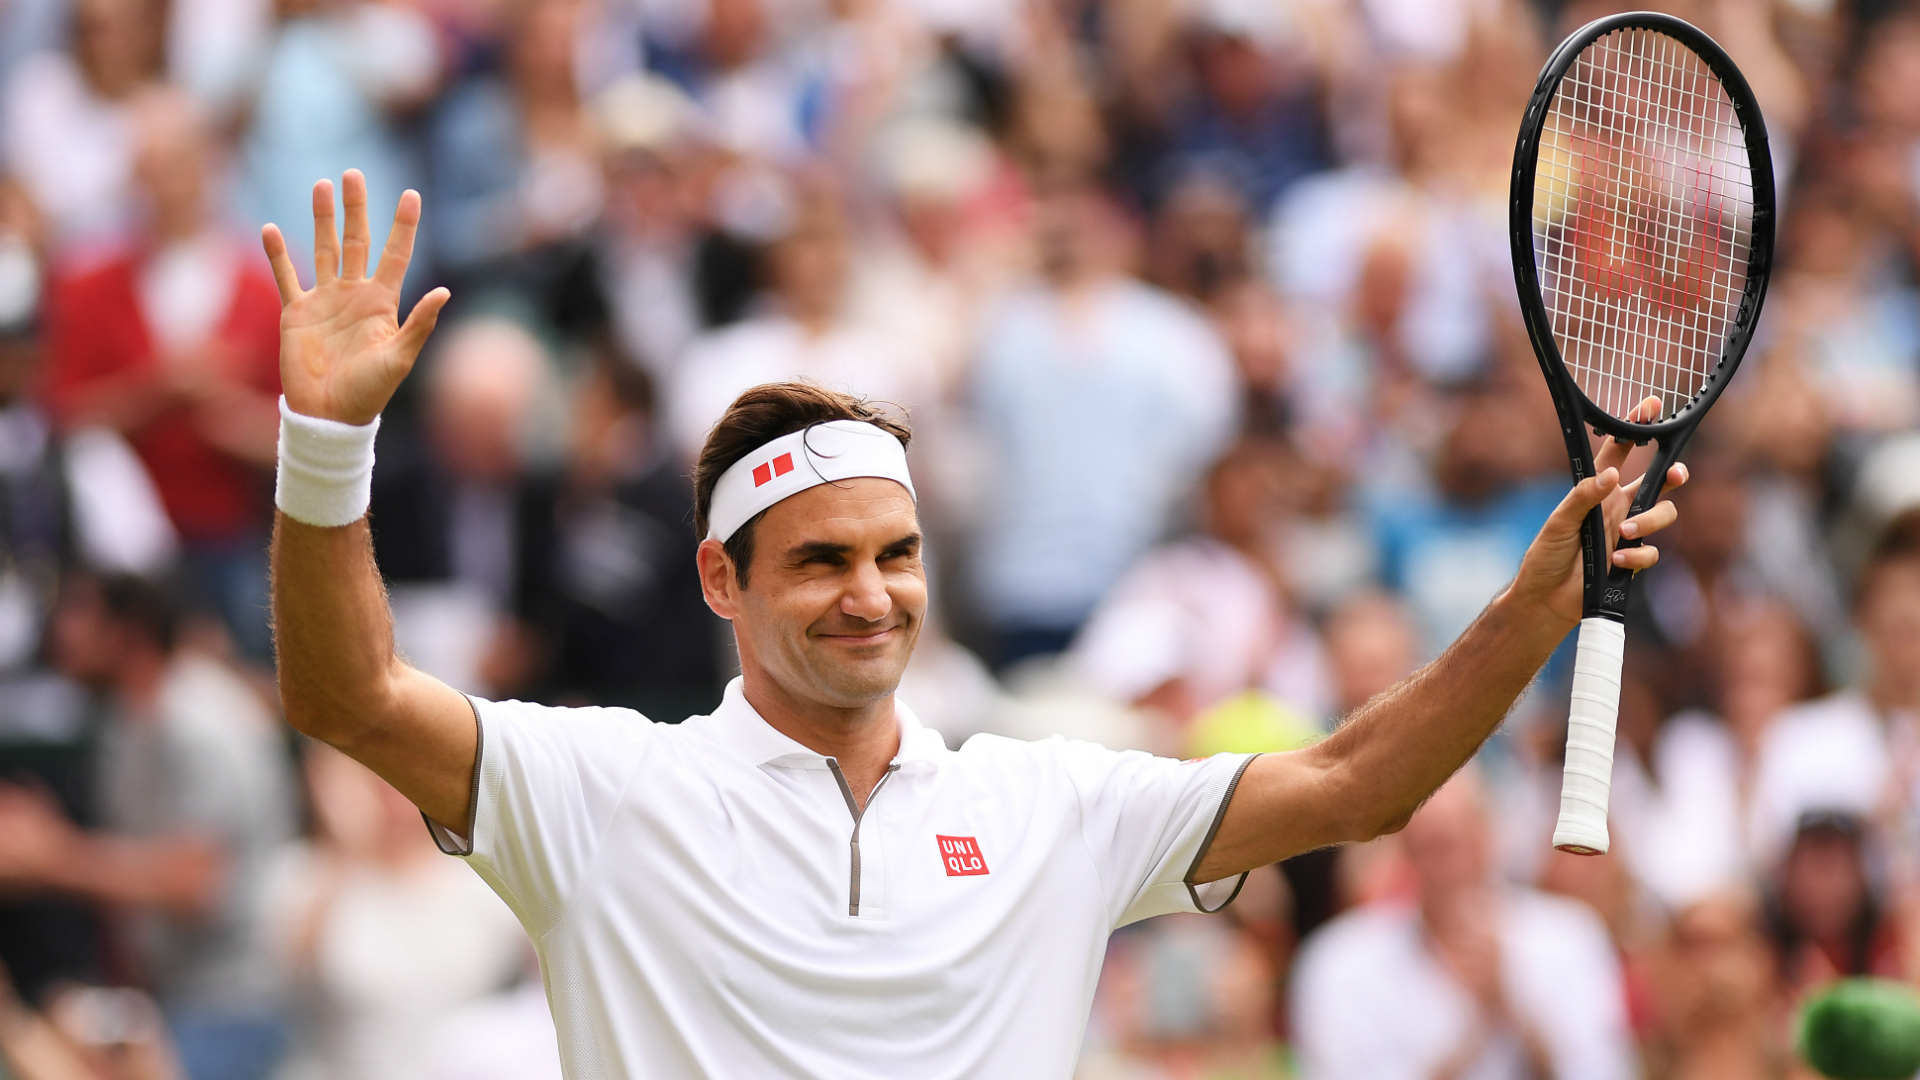 Wimbledon 2019: Roger Federer eases into second week | Sporting News1920 x 1080